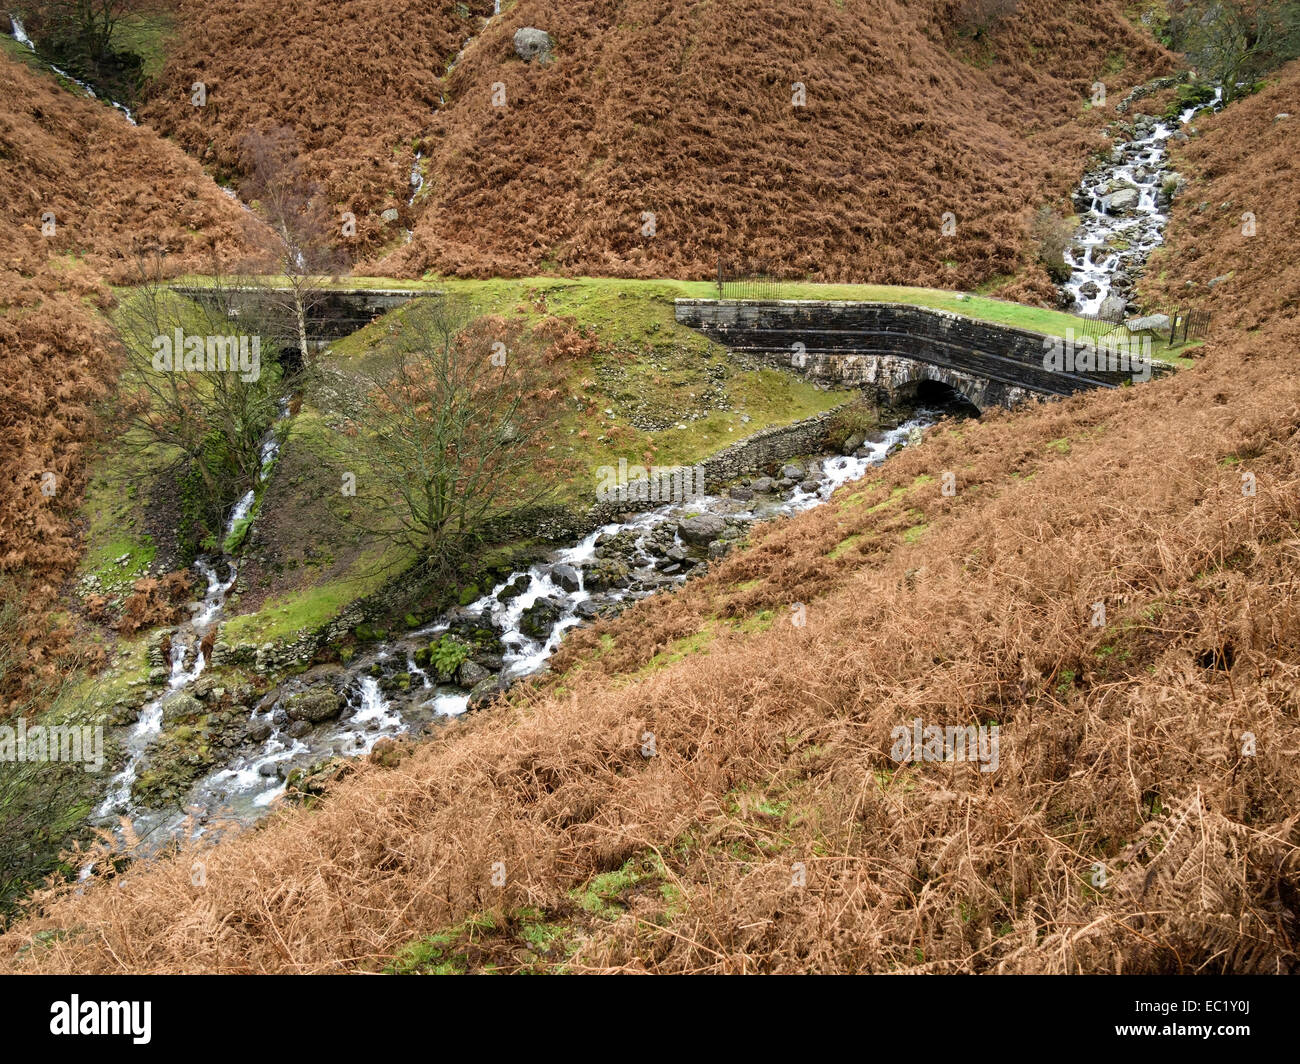 Exposed section of Thirlmere to Manchester Aqueduct crossing Greenhead Gill near Grasmere, Lake District, Cumbria, England, UK. Stock Photo